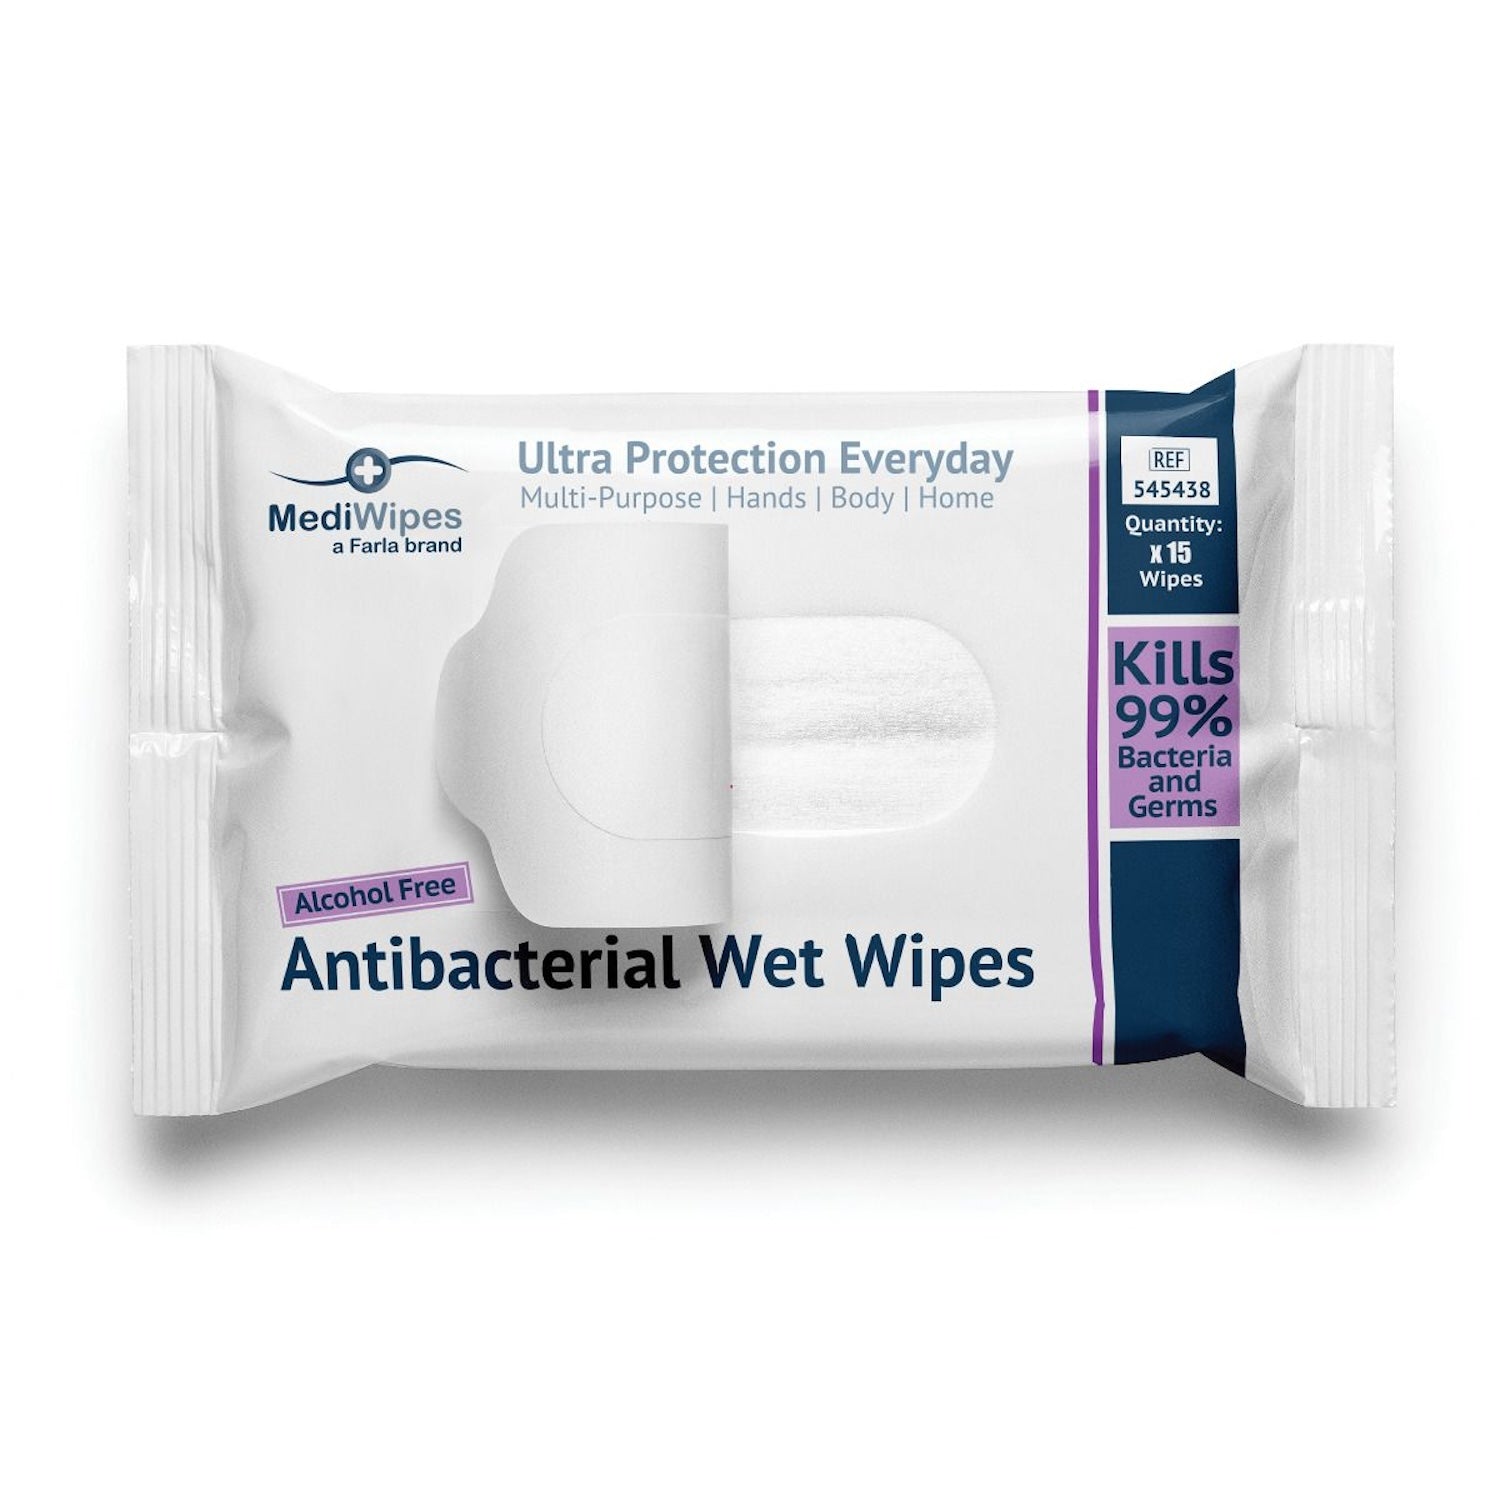 MediWipes Antibacterial Wet Wipes| Resealable Pack| Alcohol Free | Pack of 15